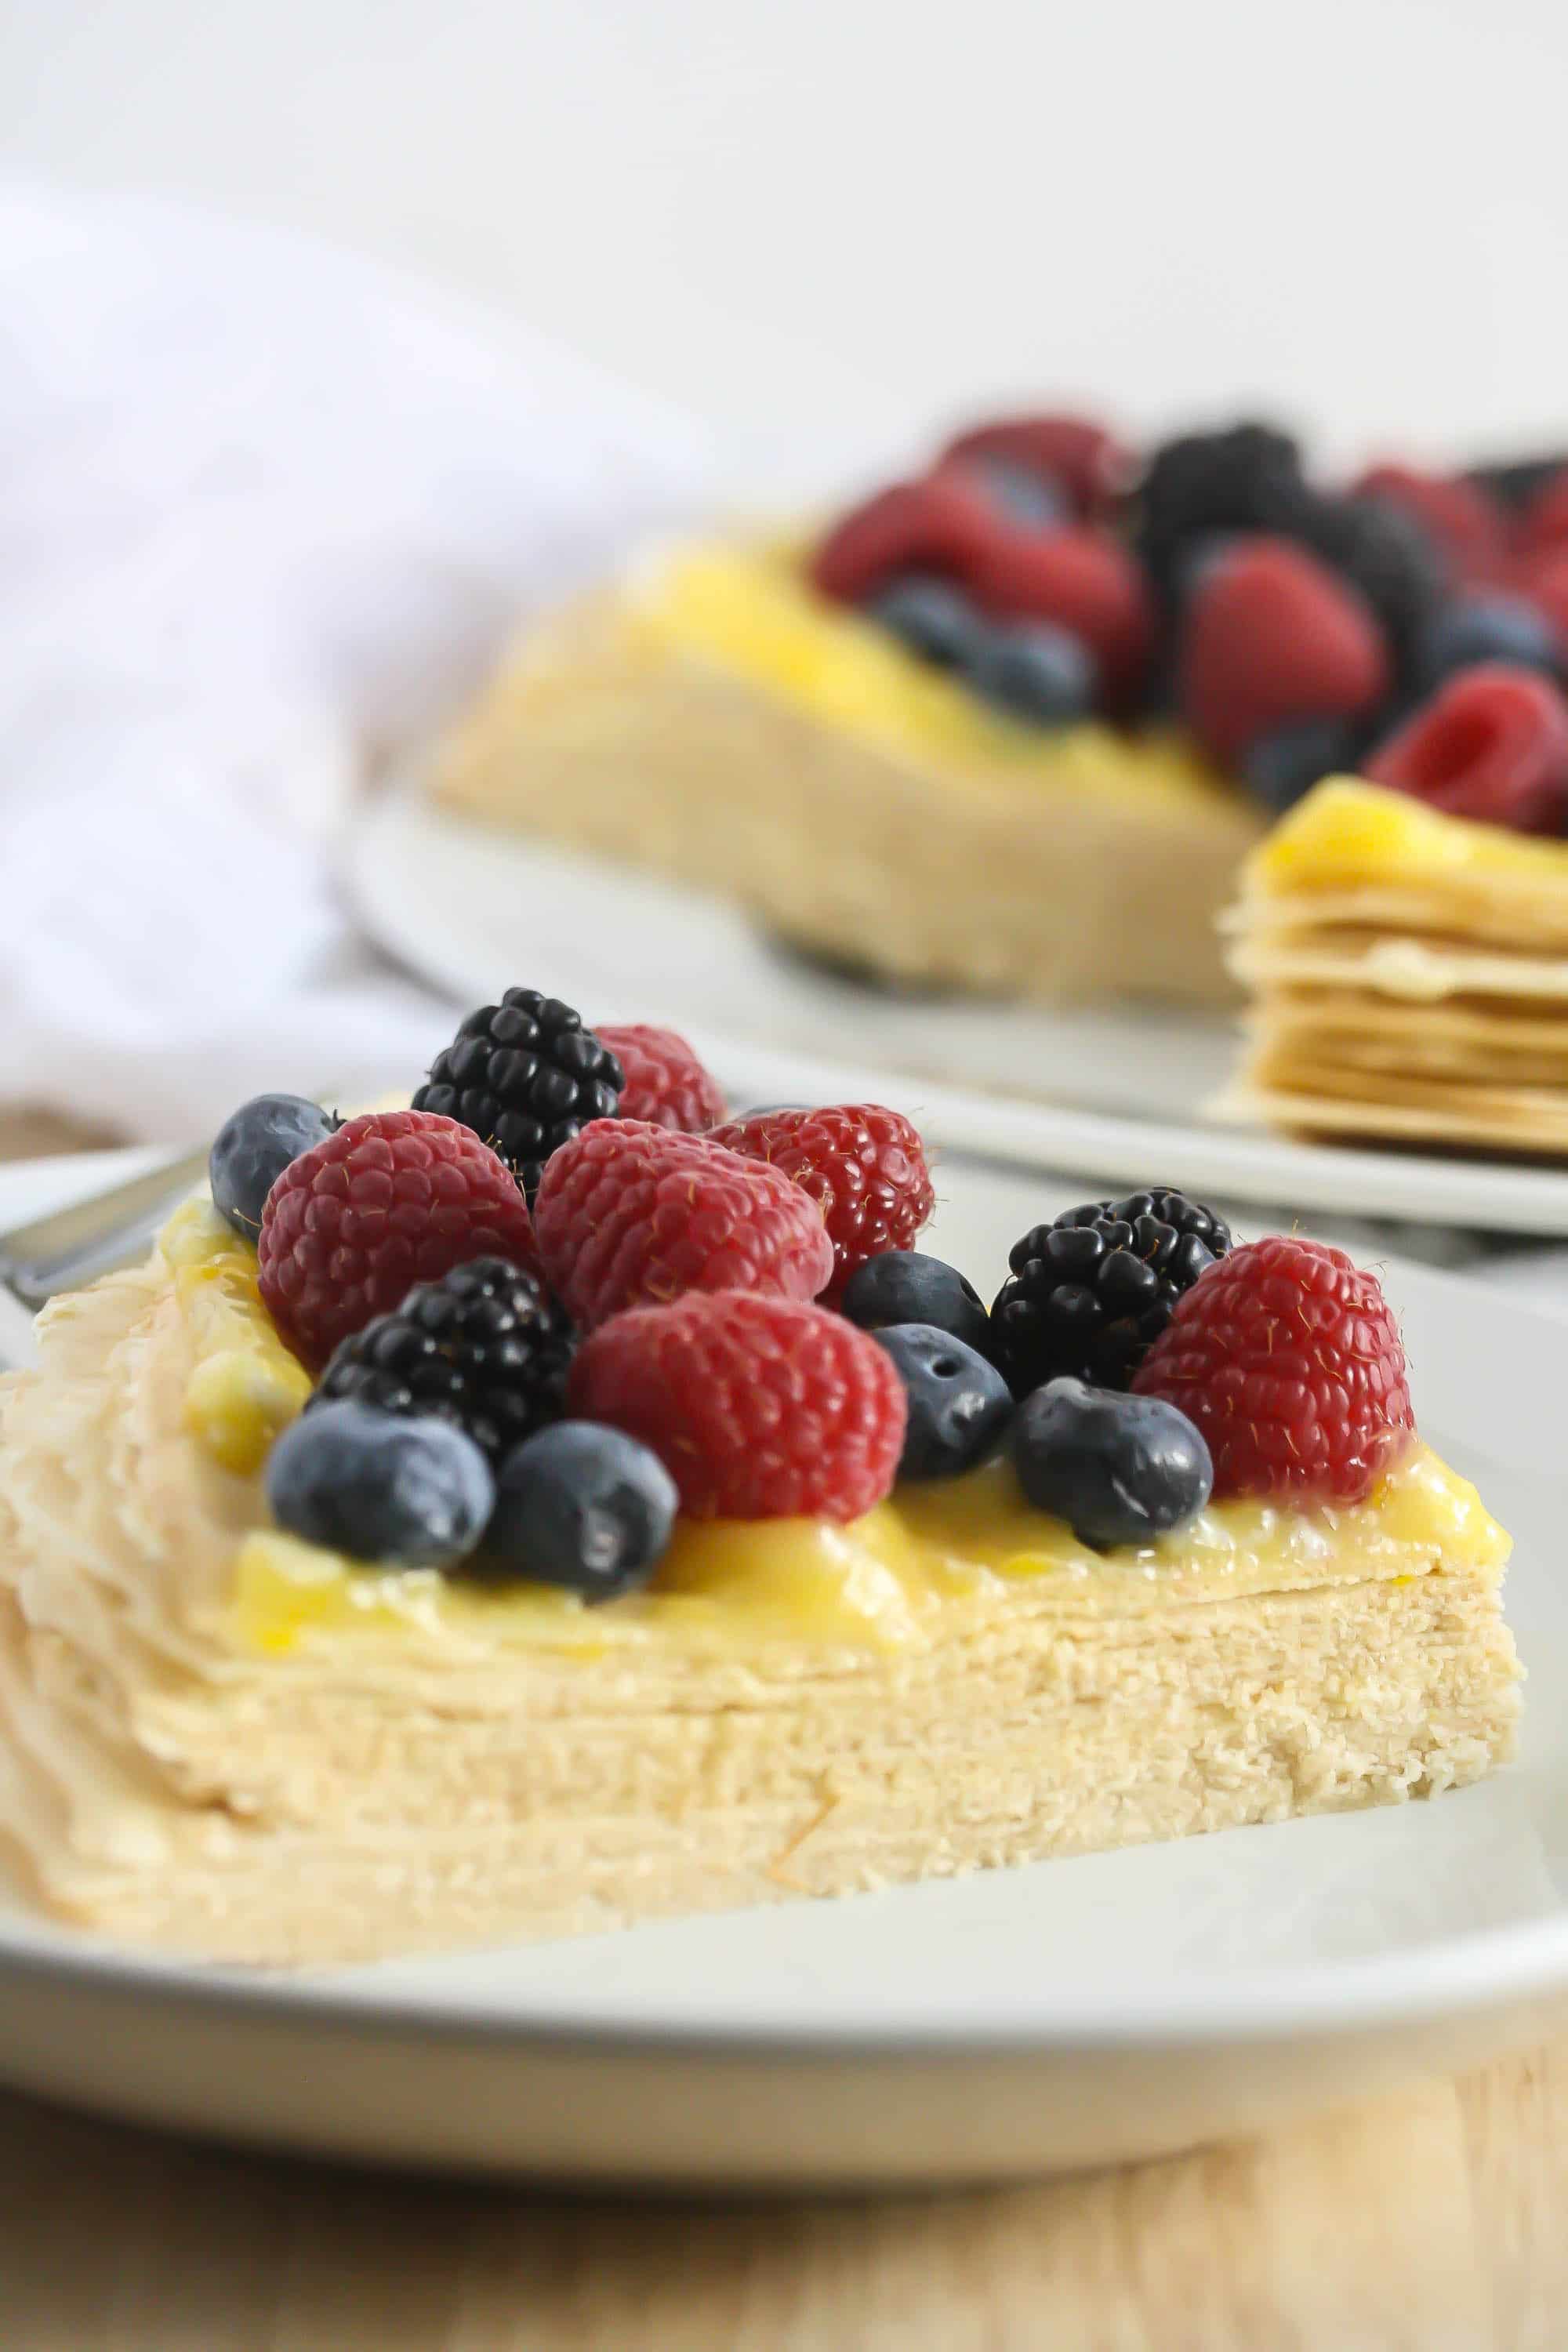 Buttercream Crepe Cake with Lemon Curd Topping